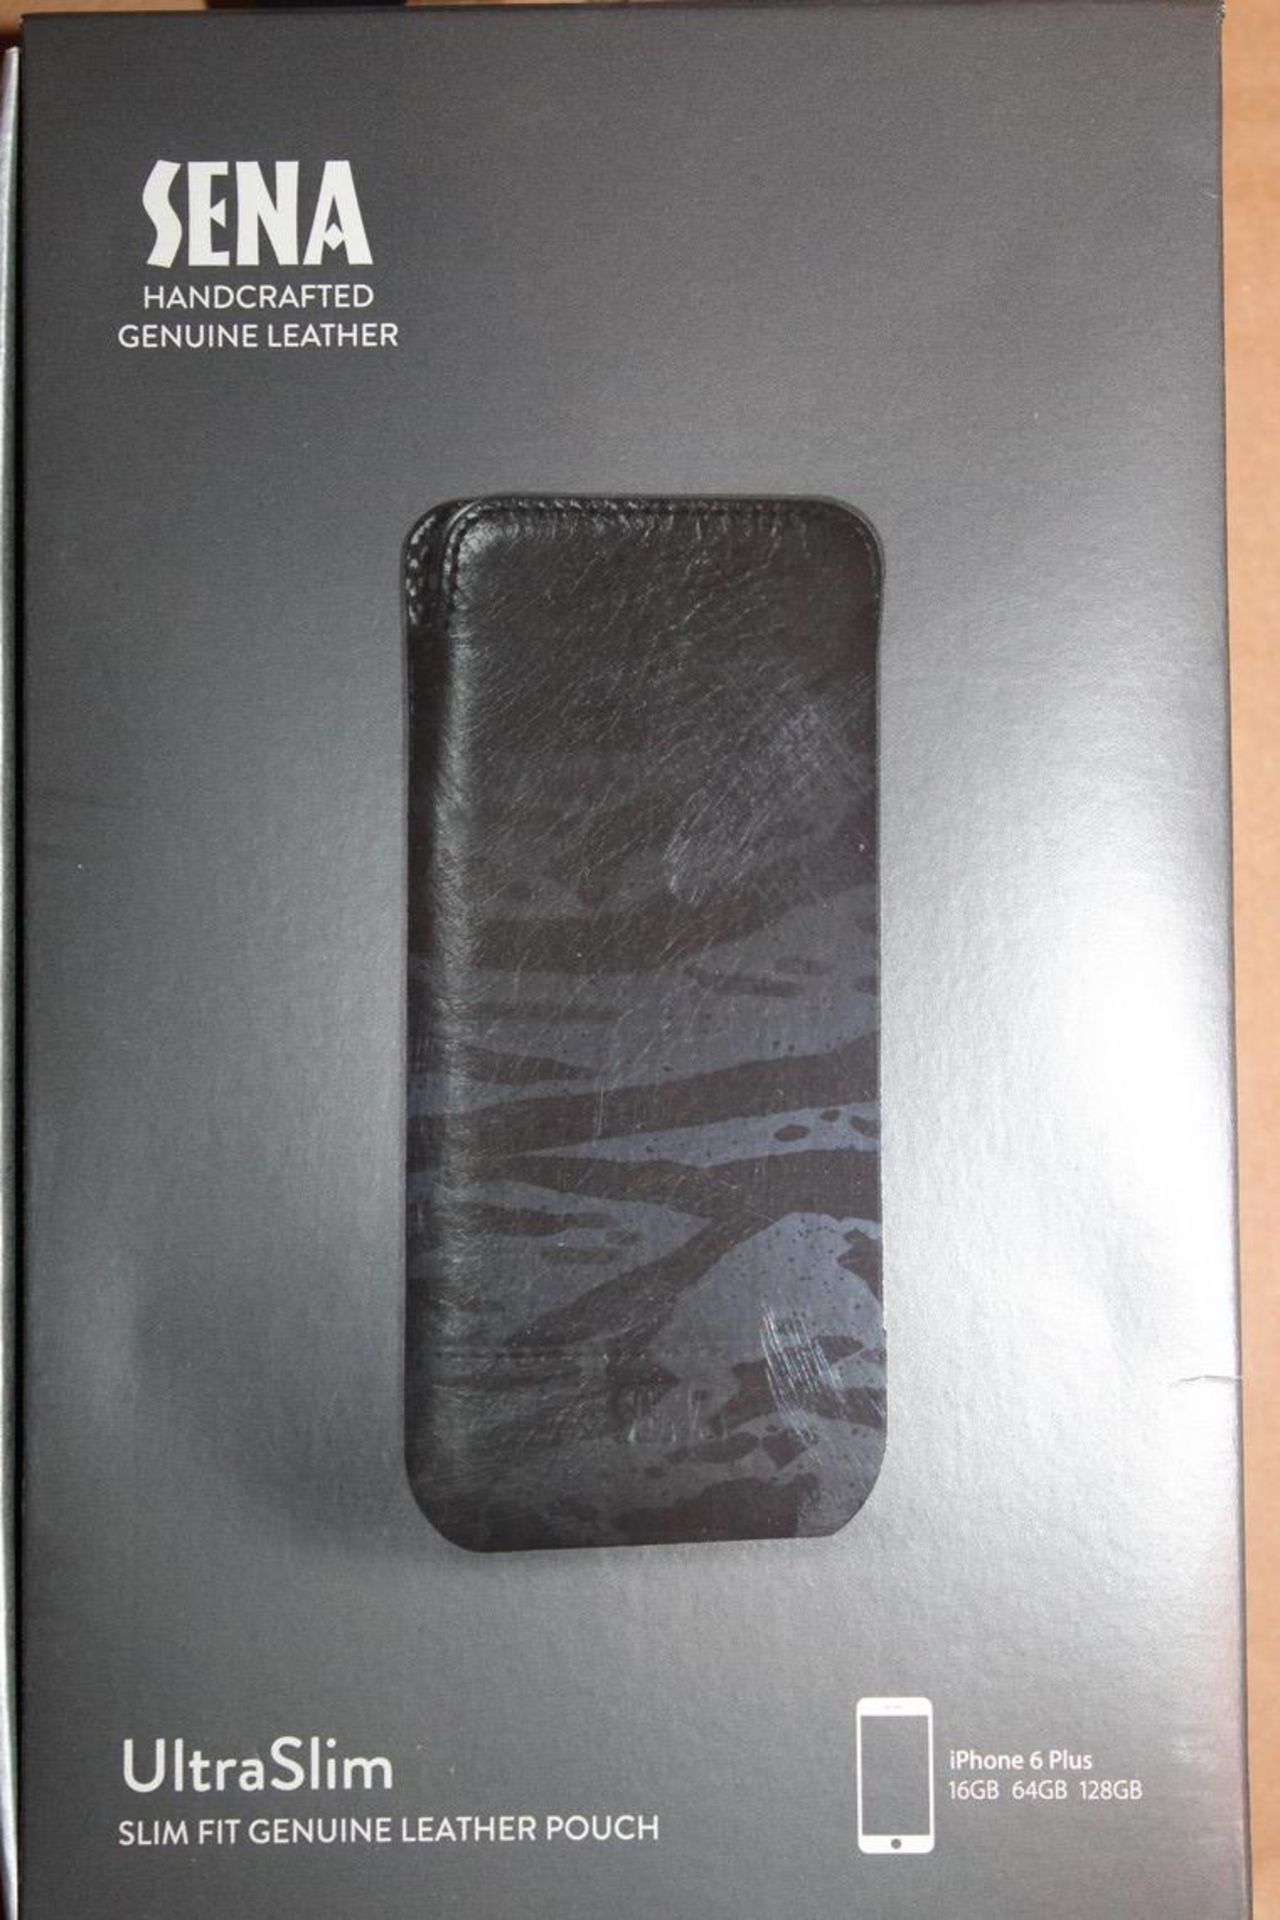 Lot to Contain 2 Brand-New Sena, Ultra Slim Leather Pouch for iPhone 6+, Combined RRP£60.00